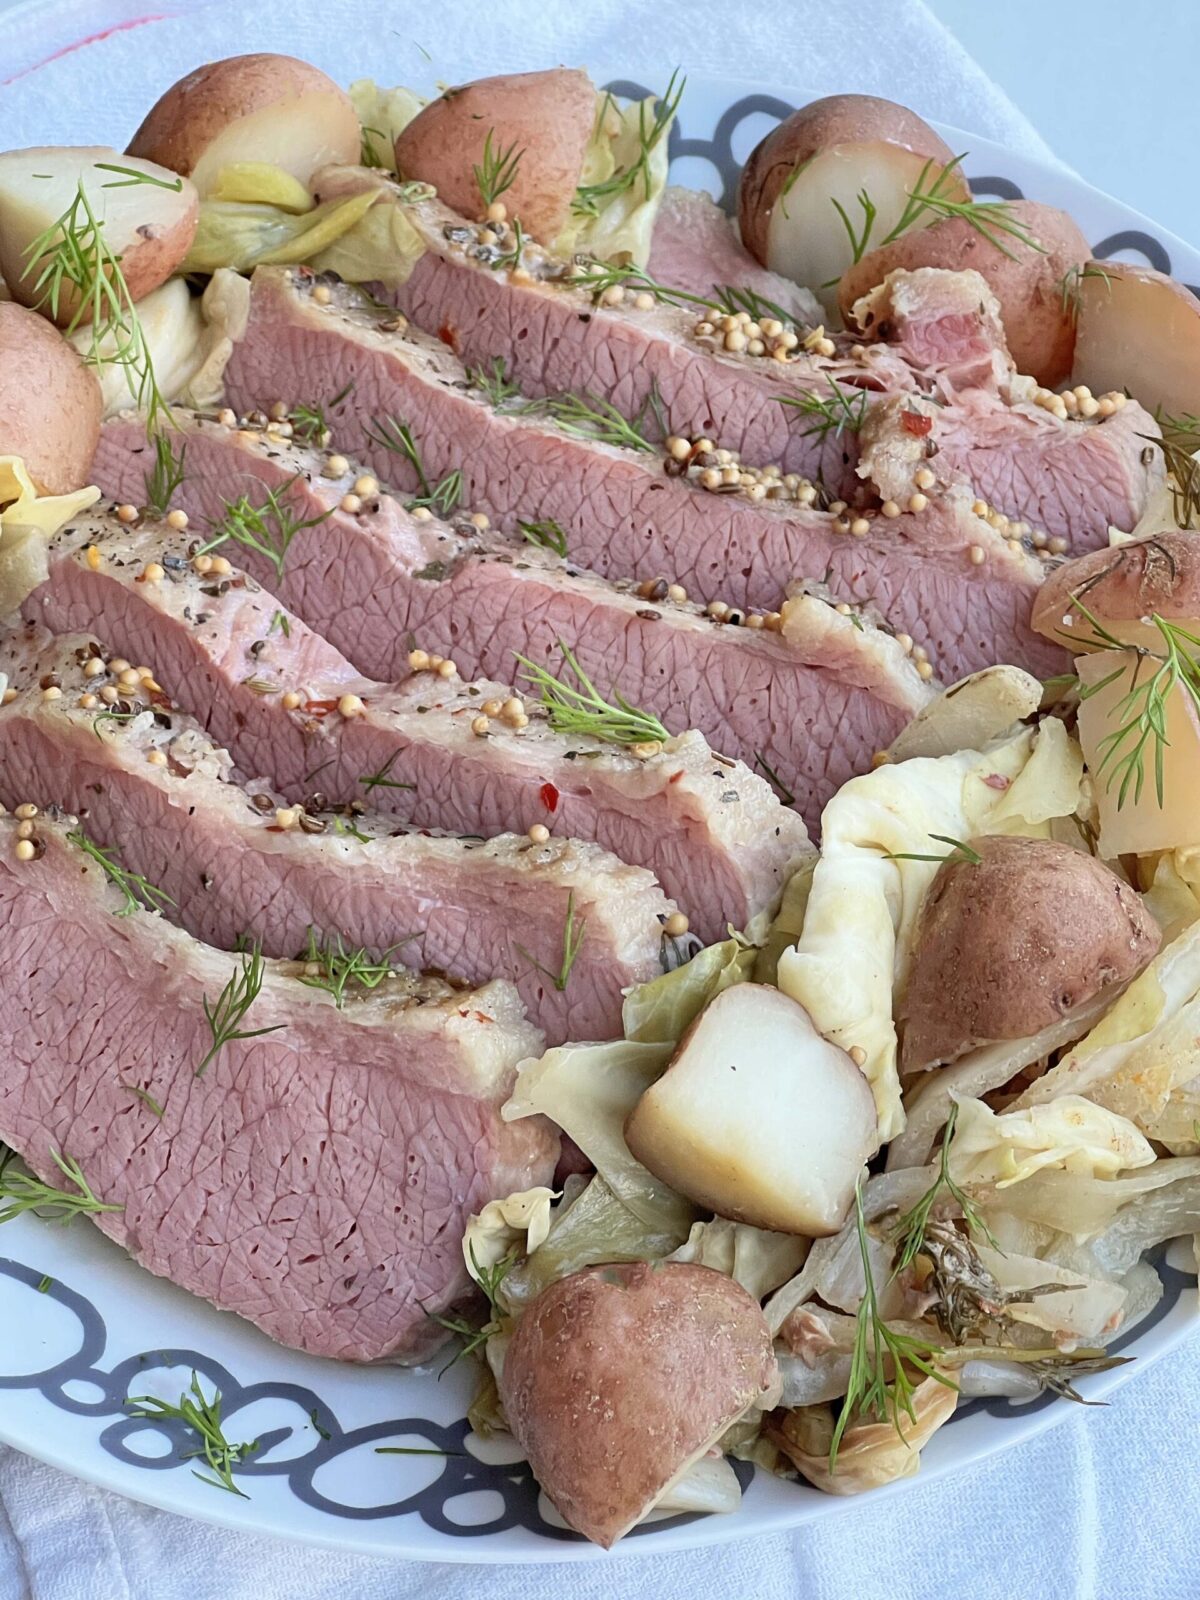 How To Make Corn Beef and Cabbage In a Slow Cooker